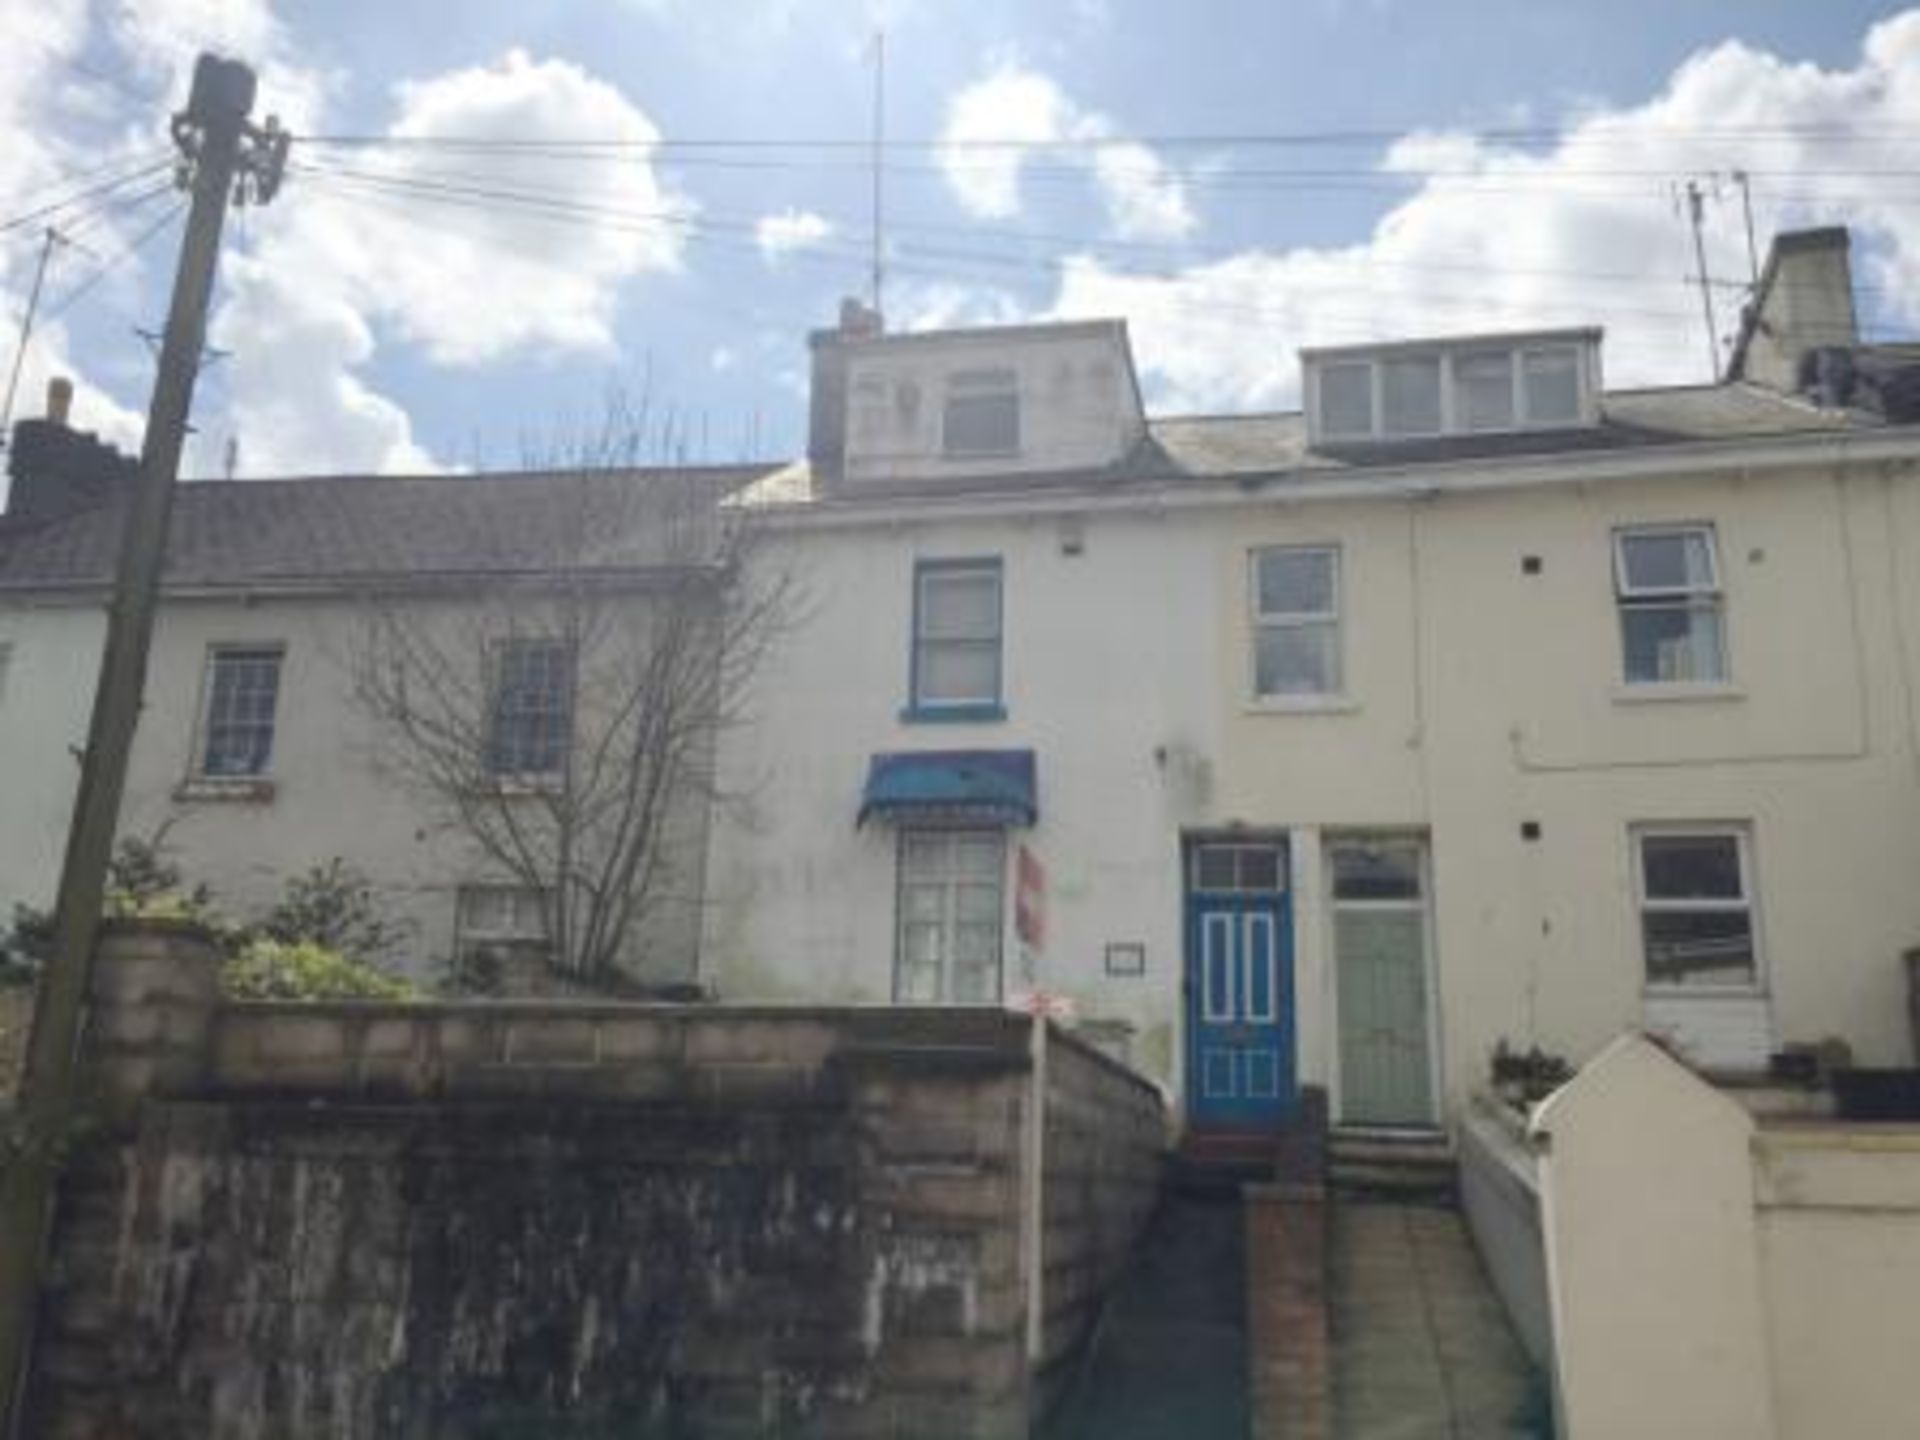 TORBAY AREA - MID-TERRACE PROPERTY FOR REFURBISHMENT